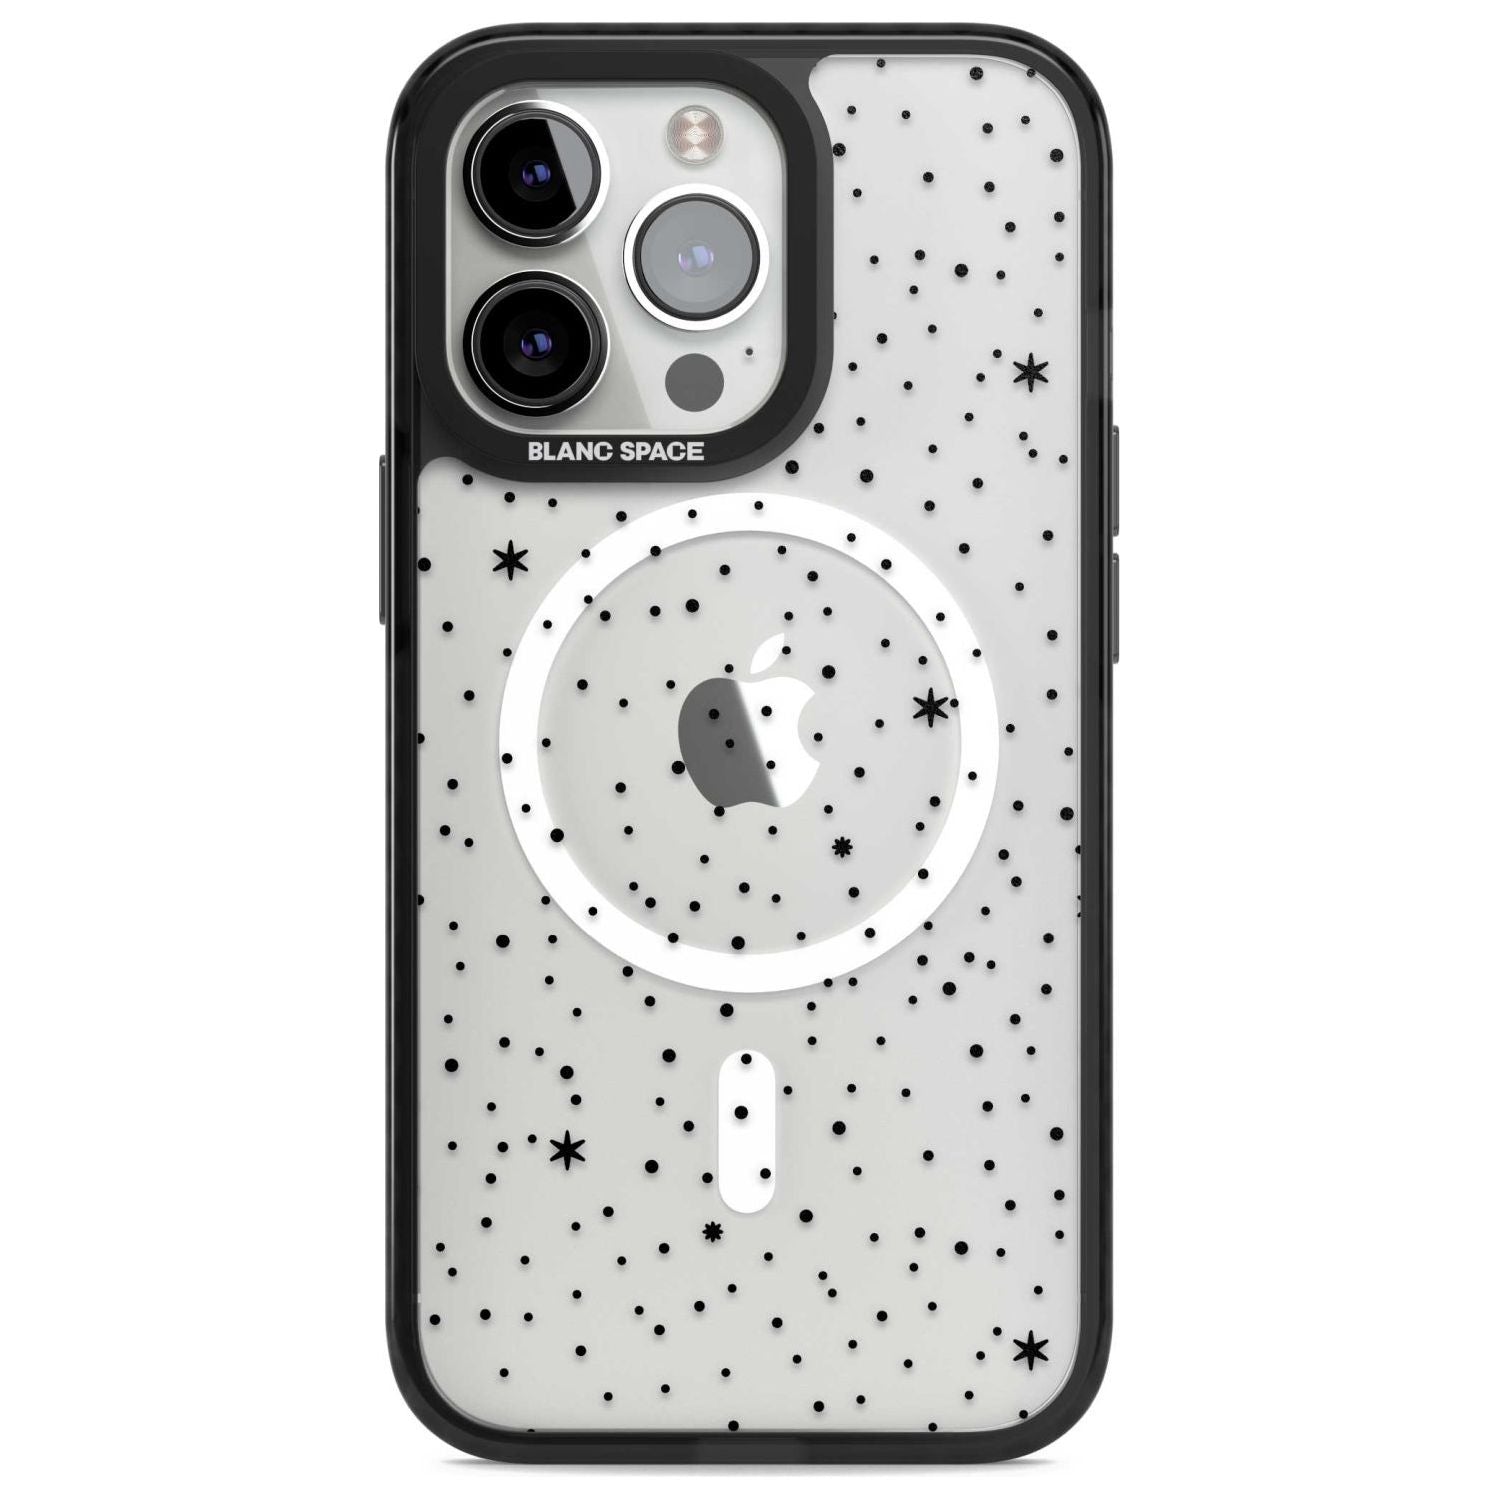 Celestial Starry Sky Phone Case iPhone 15 Pro Max / Magsafe Black Impact Case,iPhone 15 Pro / Magsafe Black Impact Case,iPhone 14 Pro Max / Magsafe Black Impact Case,iPhone 14 Pro / Magsafe Black Impact Case,iPhone 13 Pro / Magsafe Black Impact Case Blanc Space